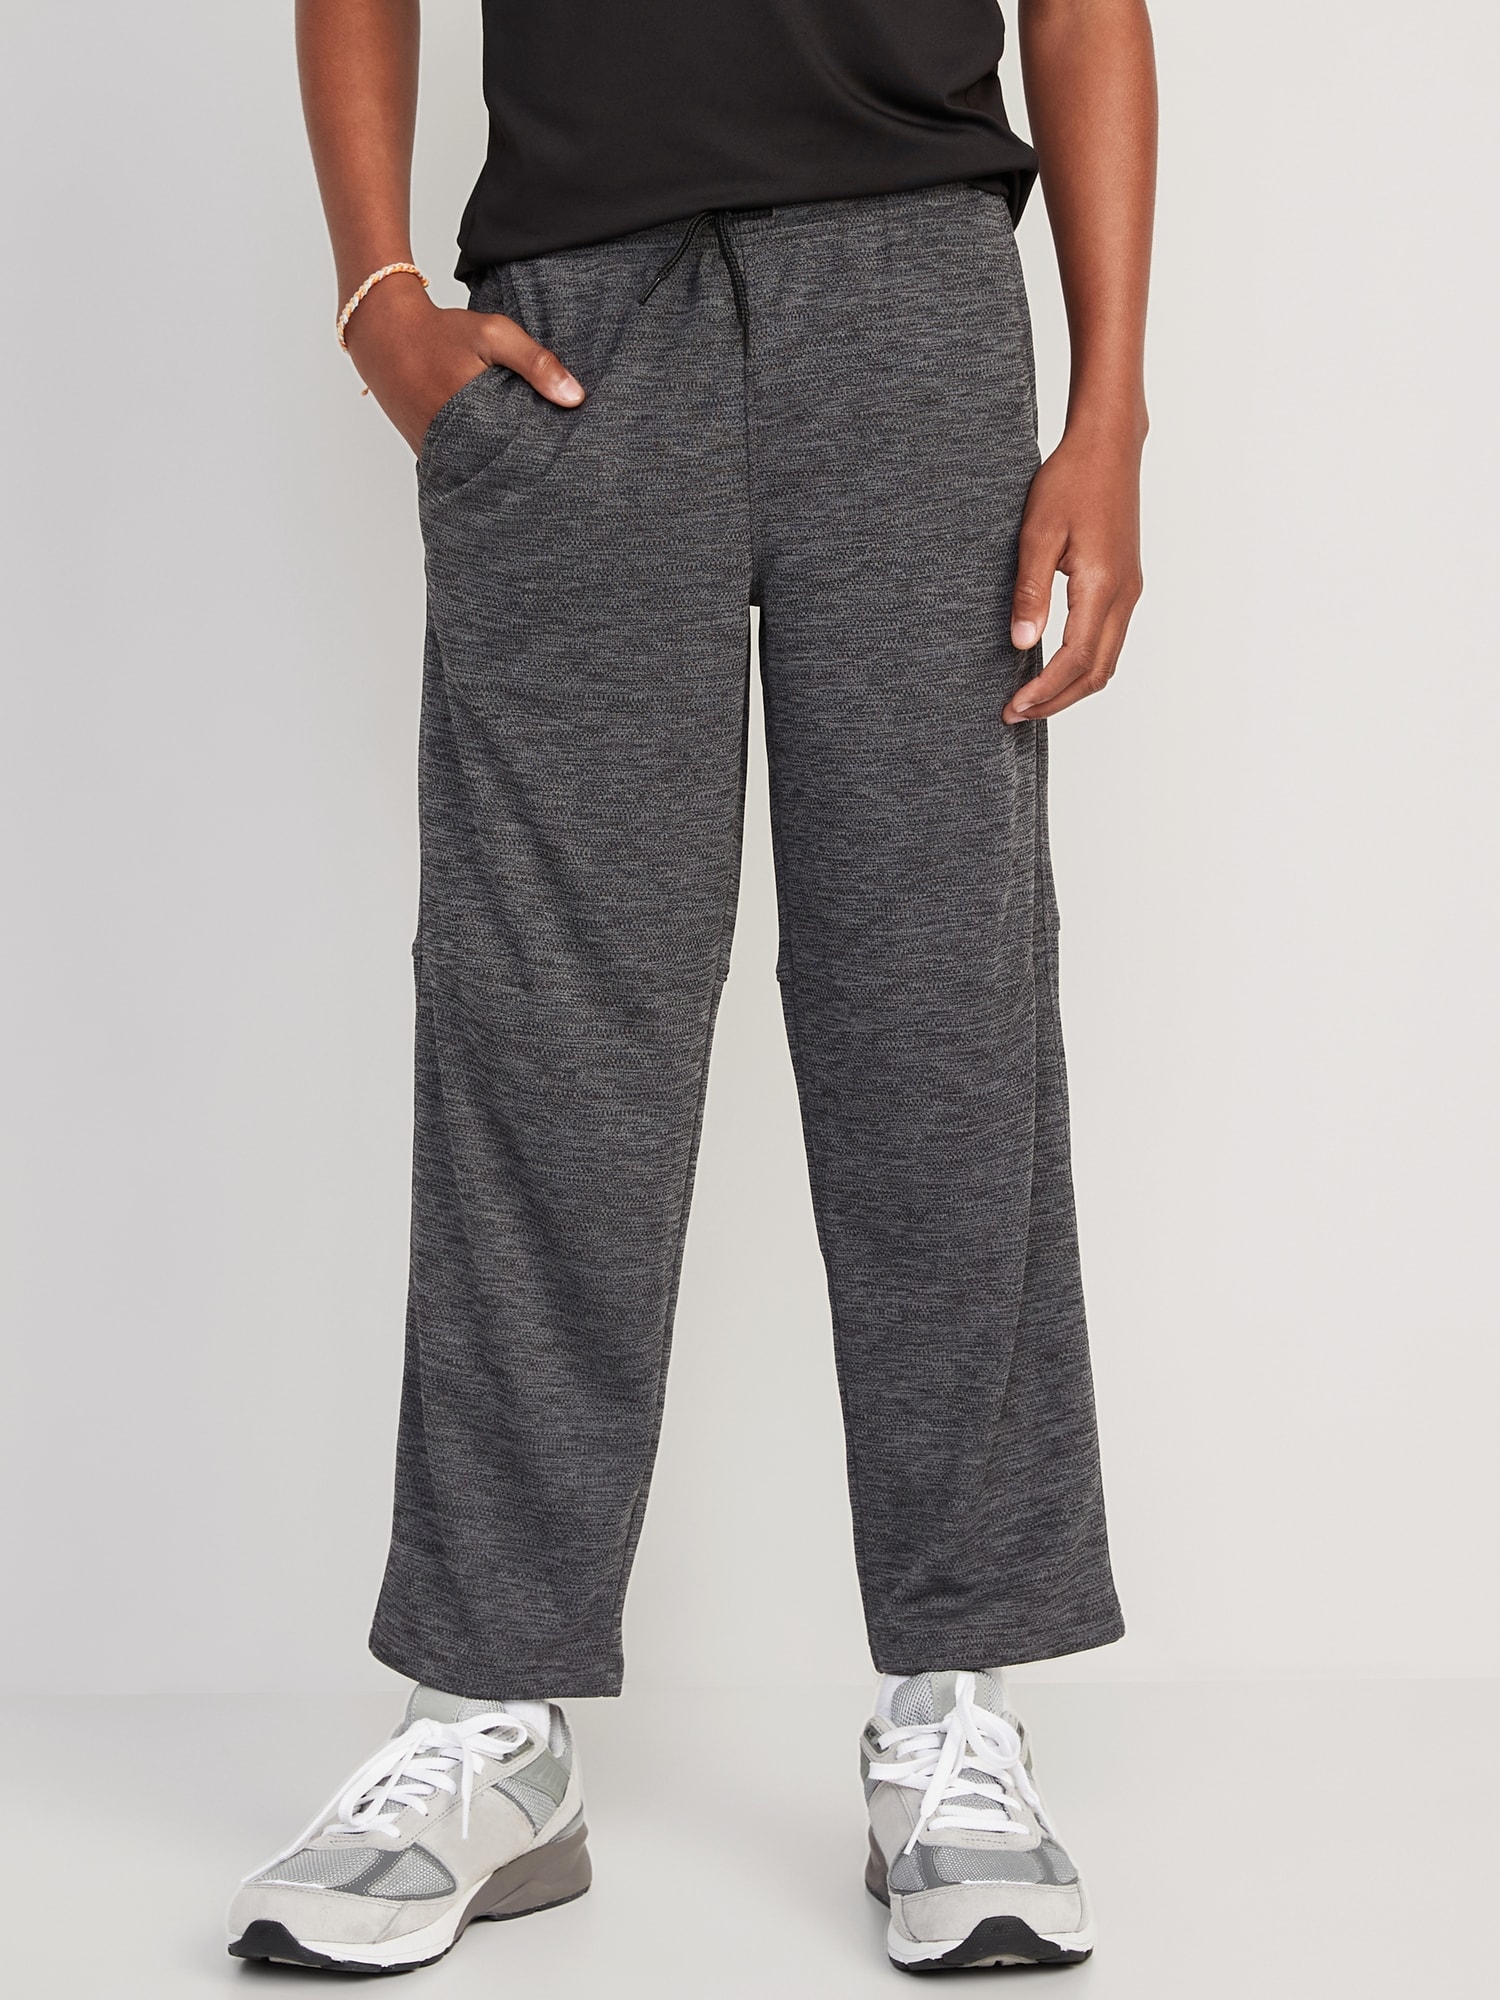 Active by Old Navy Purple Active Pants Size M (Tall) - 62% off